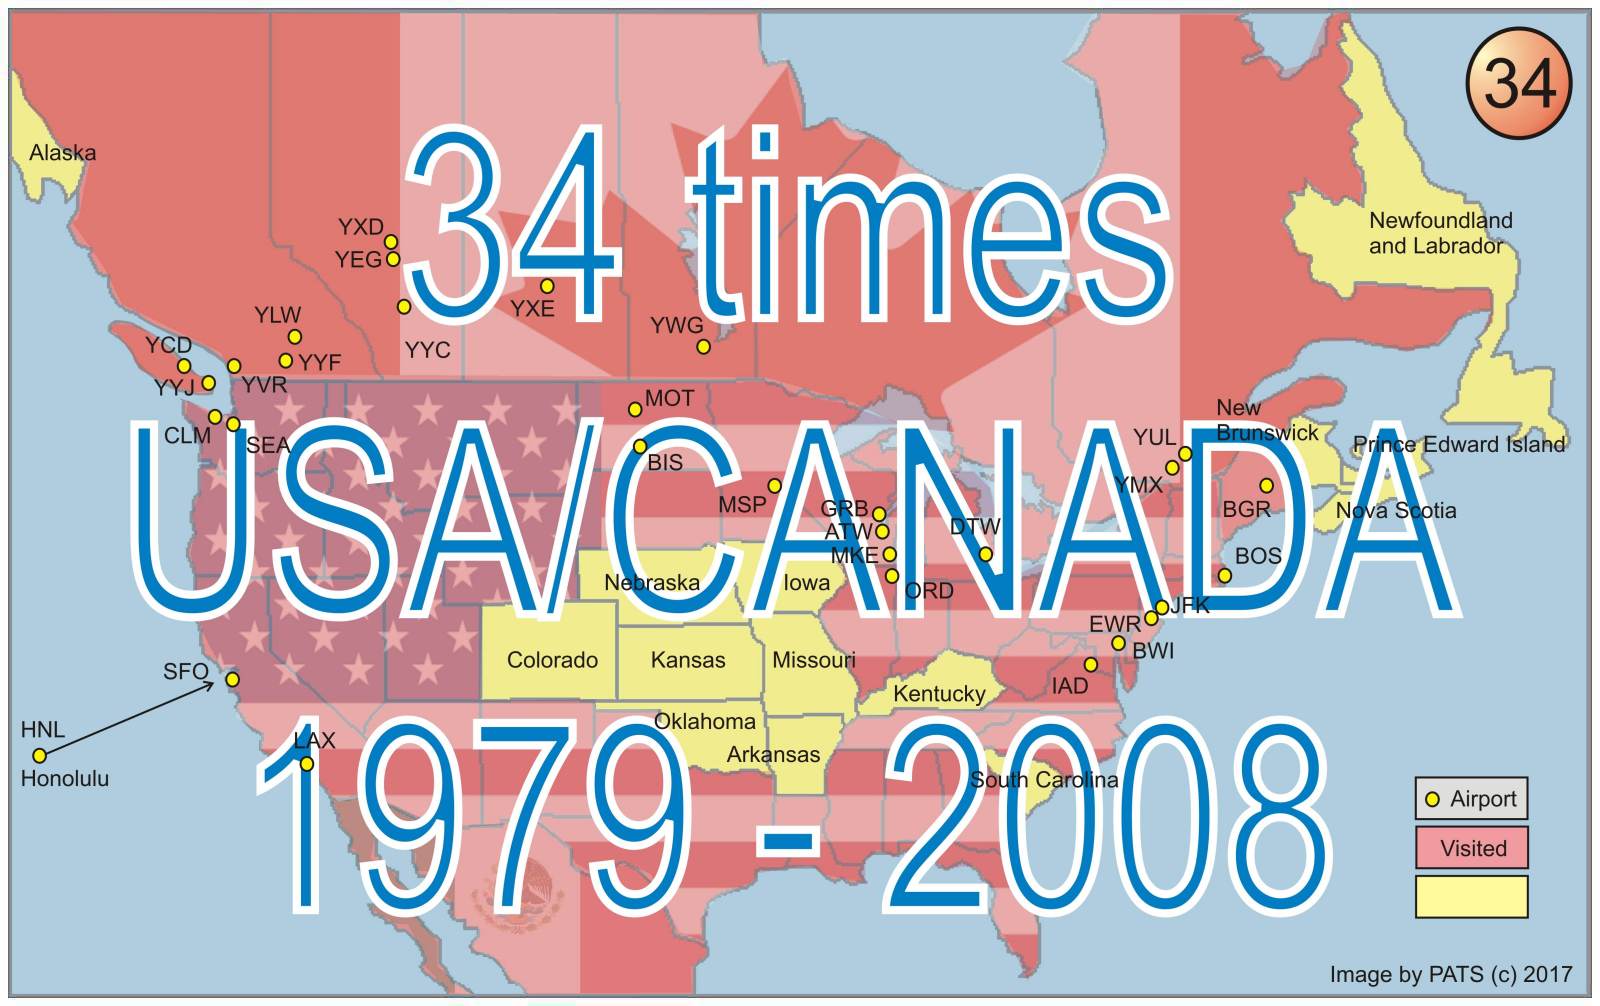 CANADA - USA- MEXICO - 34 times from 1979 to 2008 - by PATS